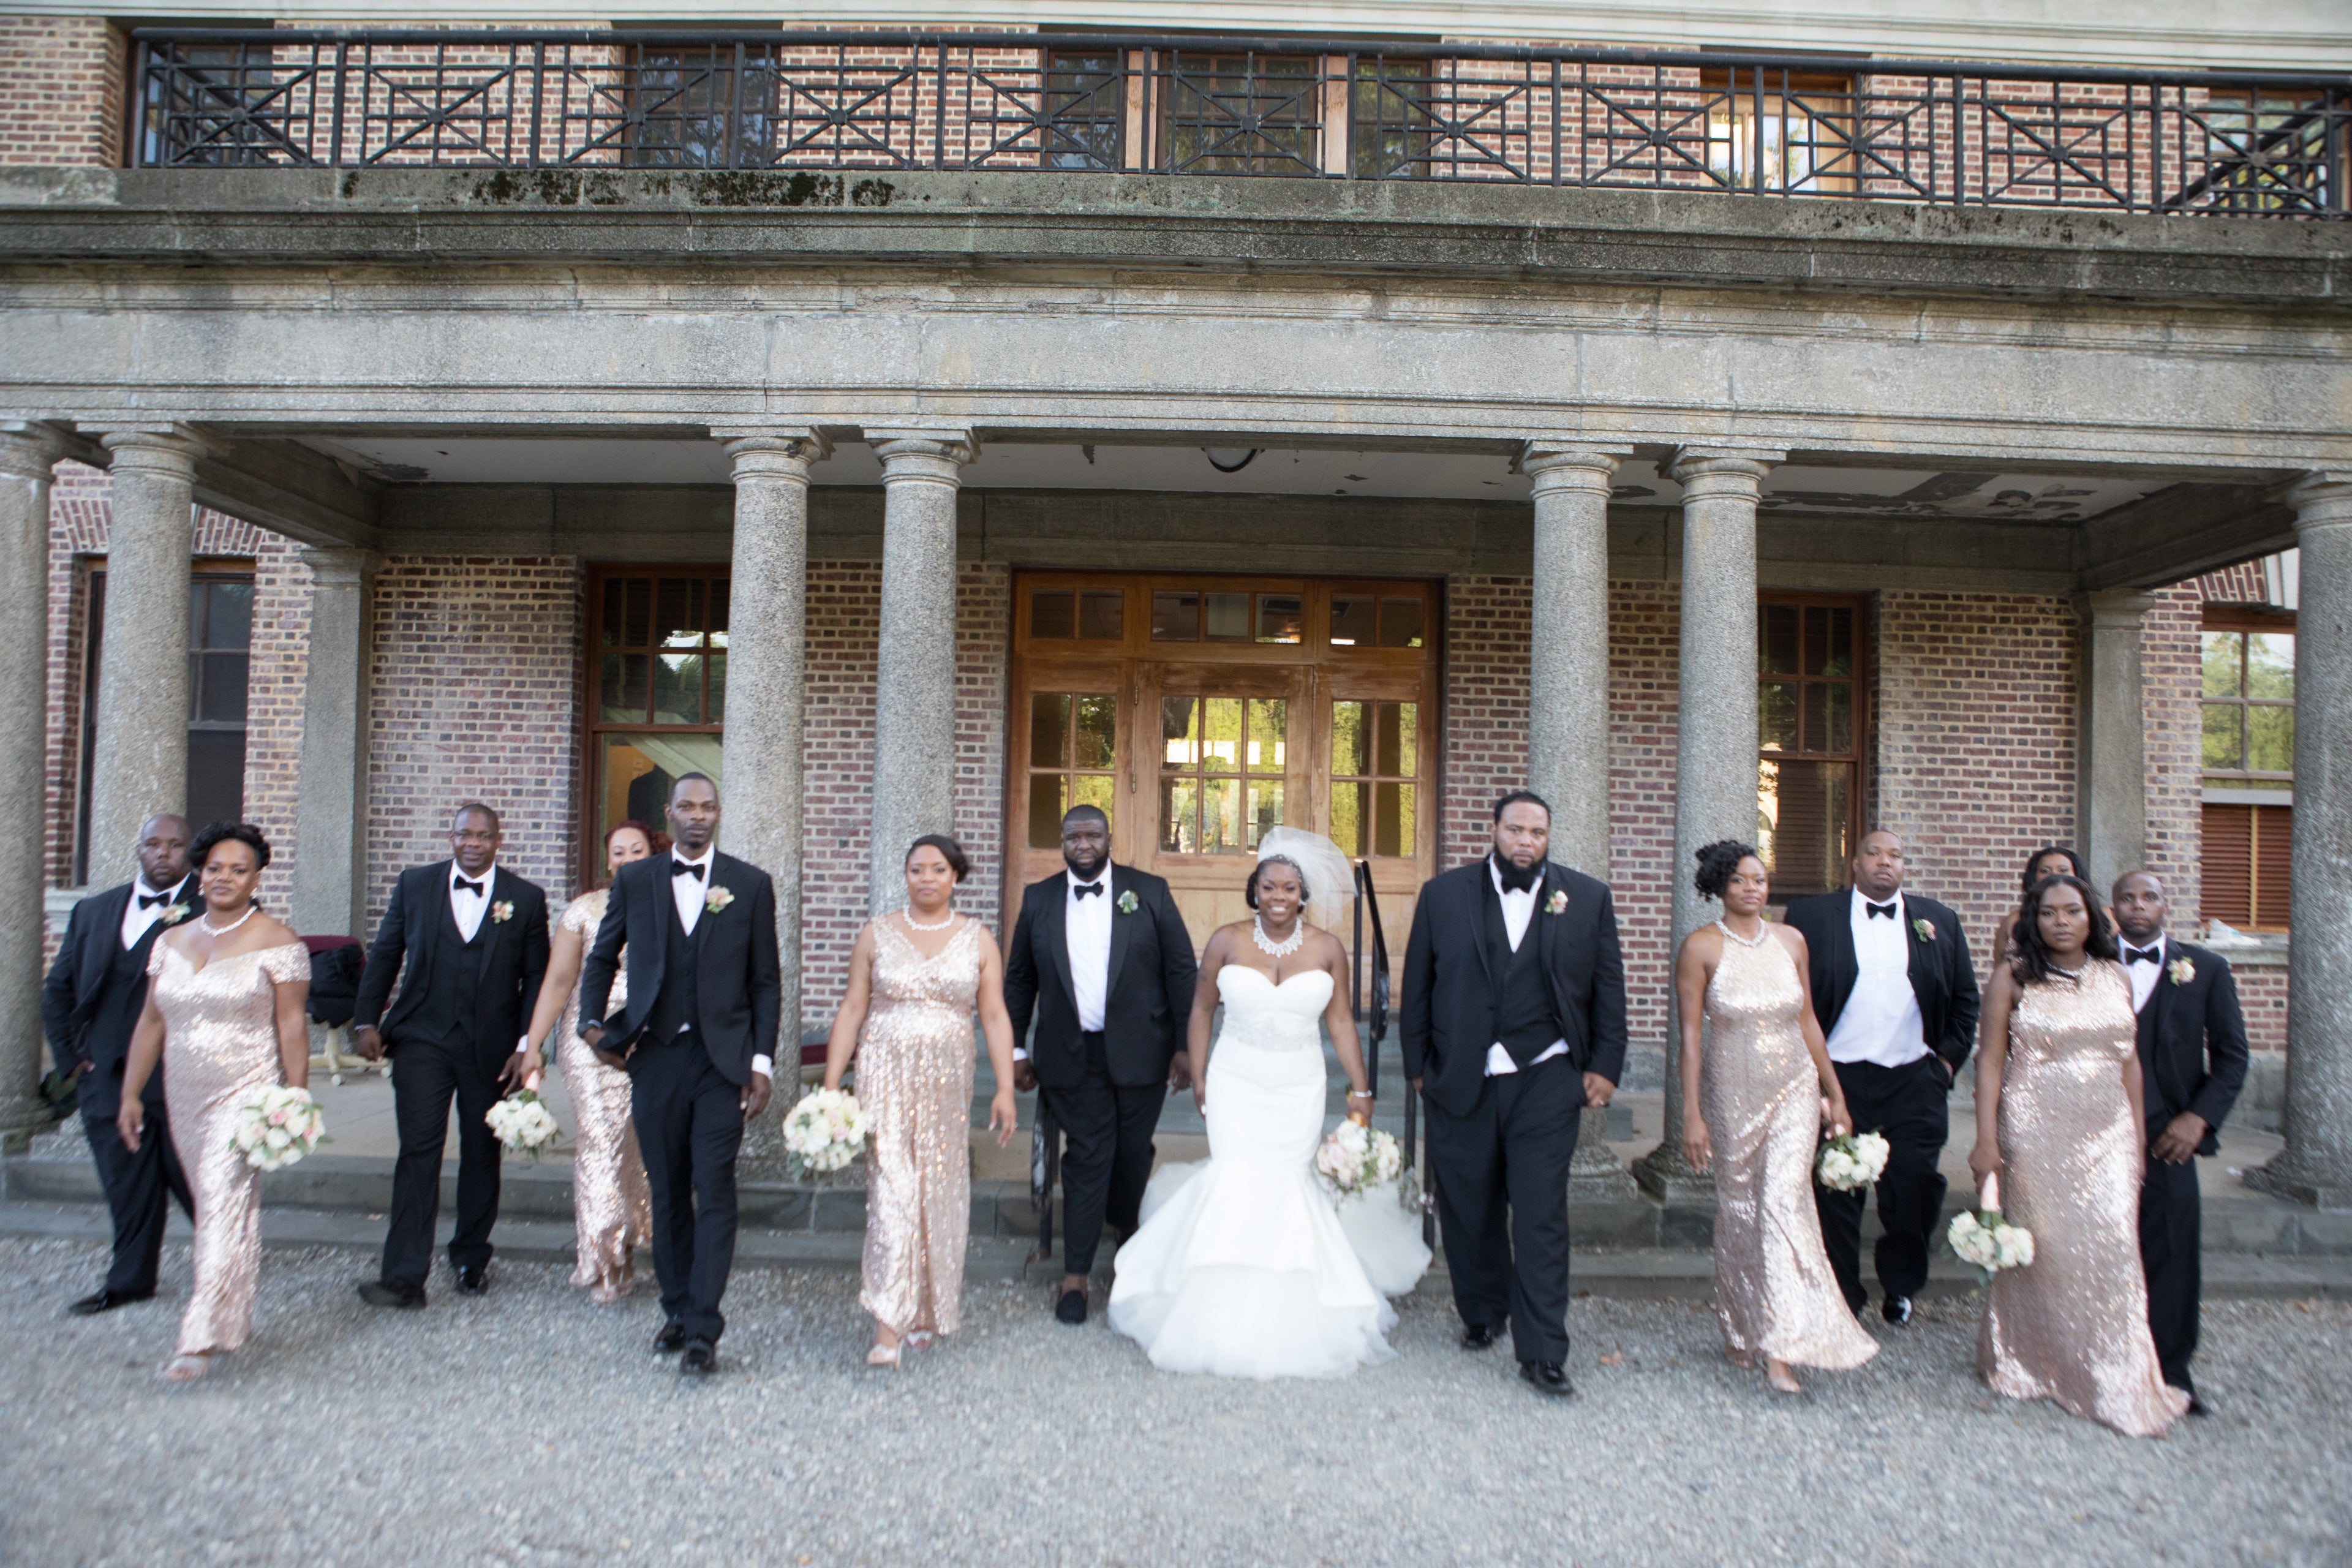 Bridal Bliss: A Round of Applause For Tuwisha and Harold's Renaissance Wedding Day